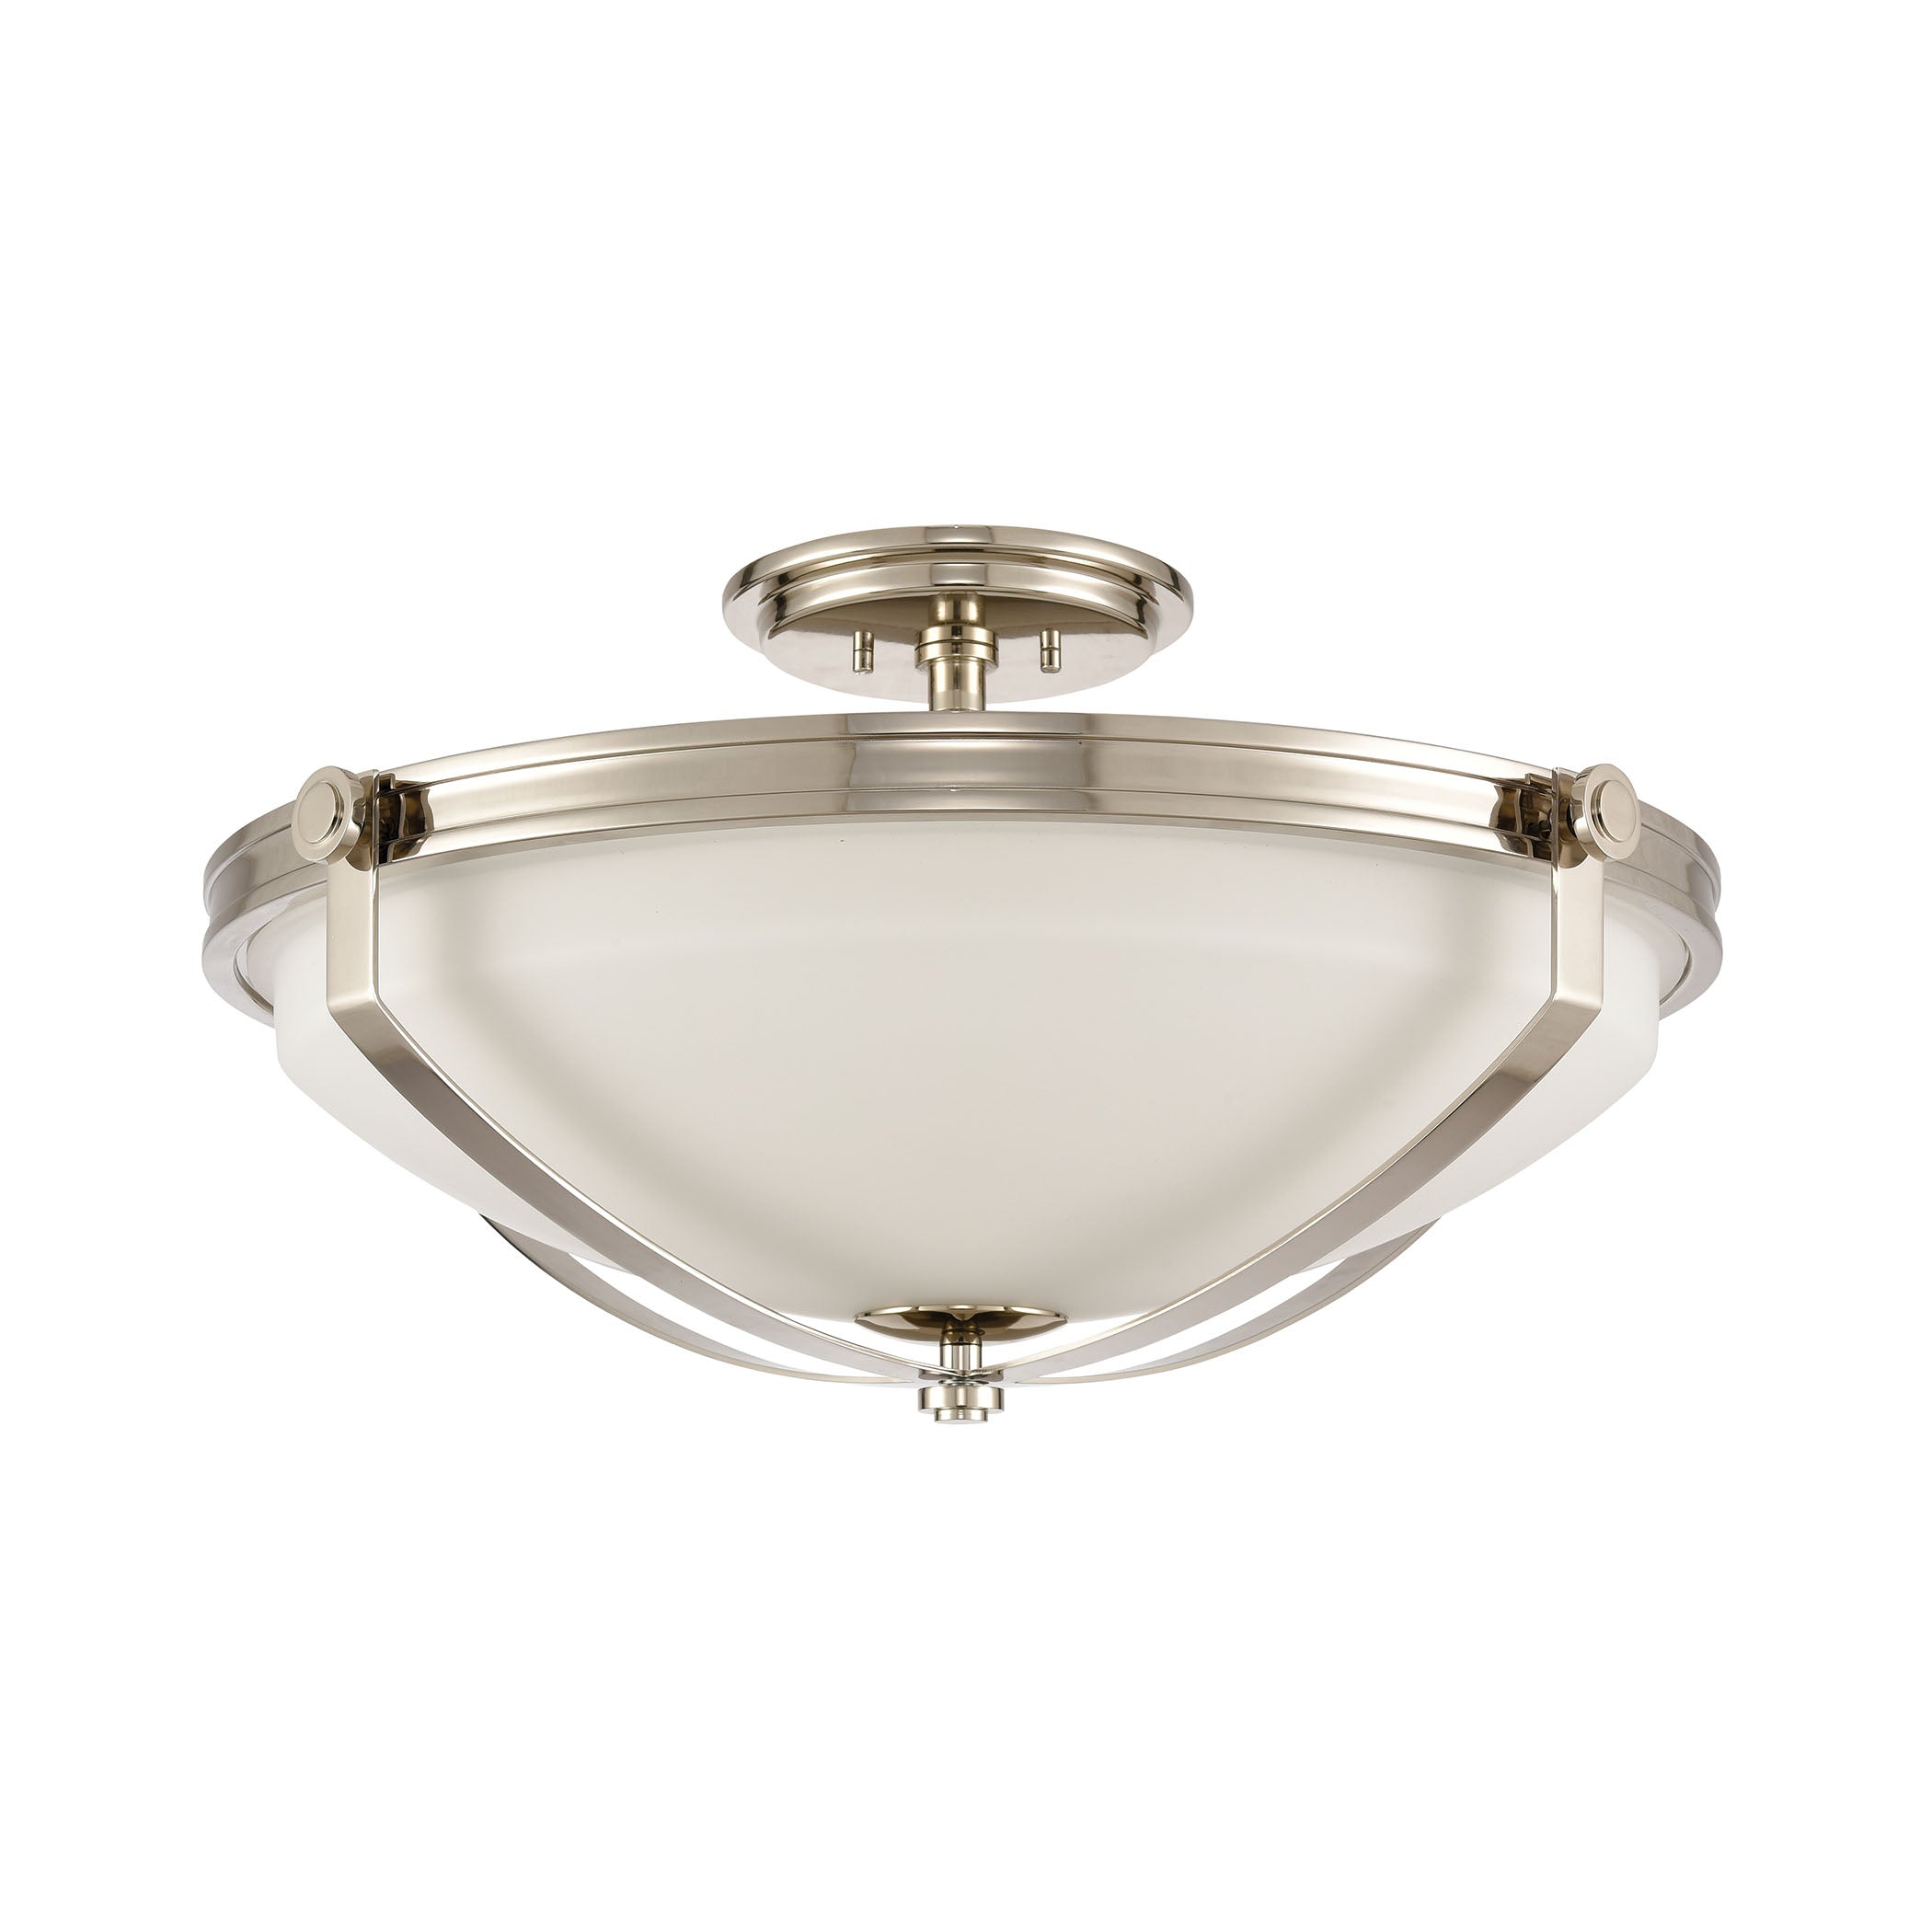 ELK Lighting 89106/4 Connelly 4-Light Semi Flush in Polished Nickel with Frosted and Painted White Glass